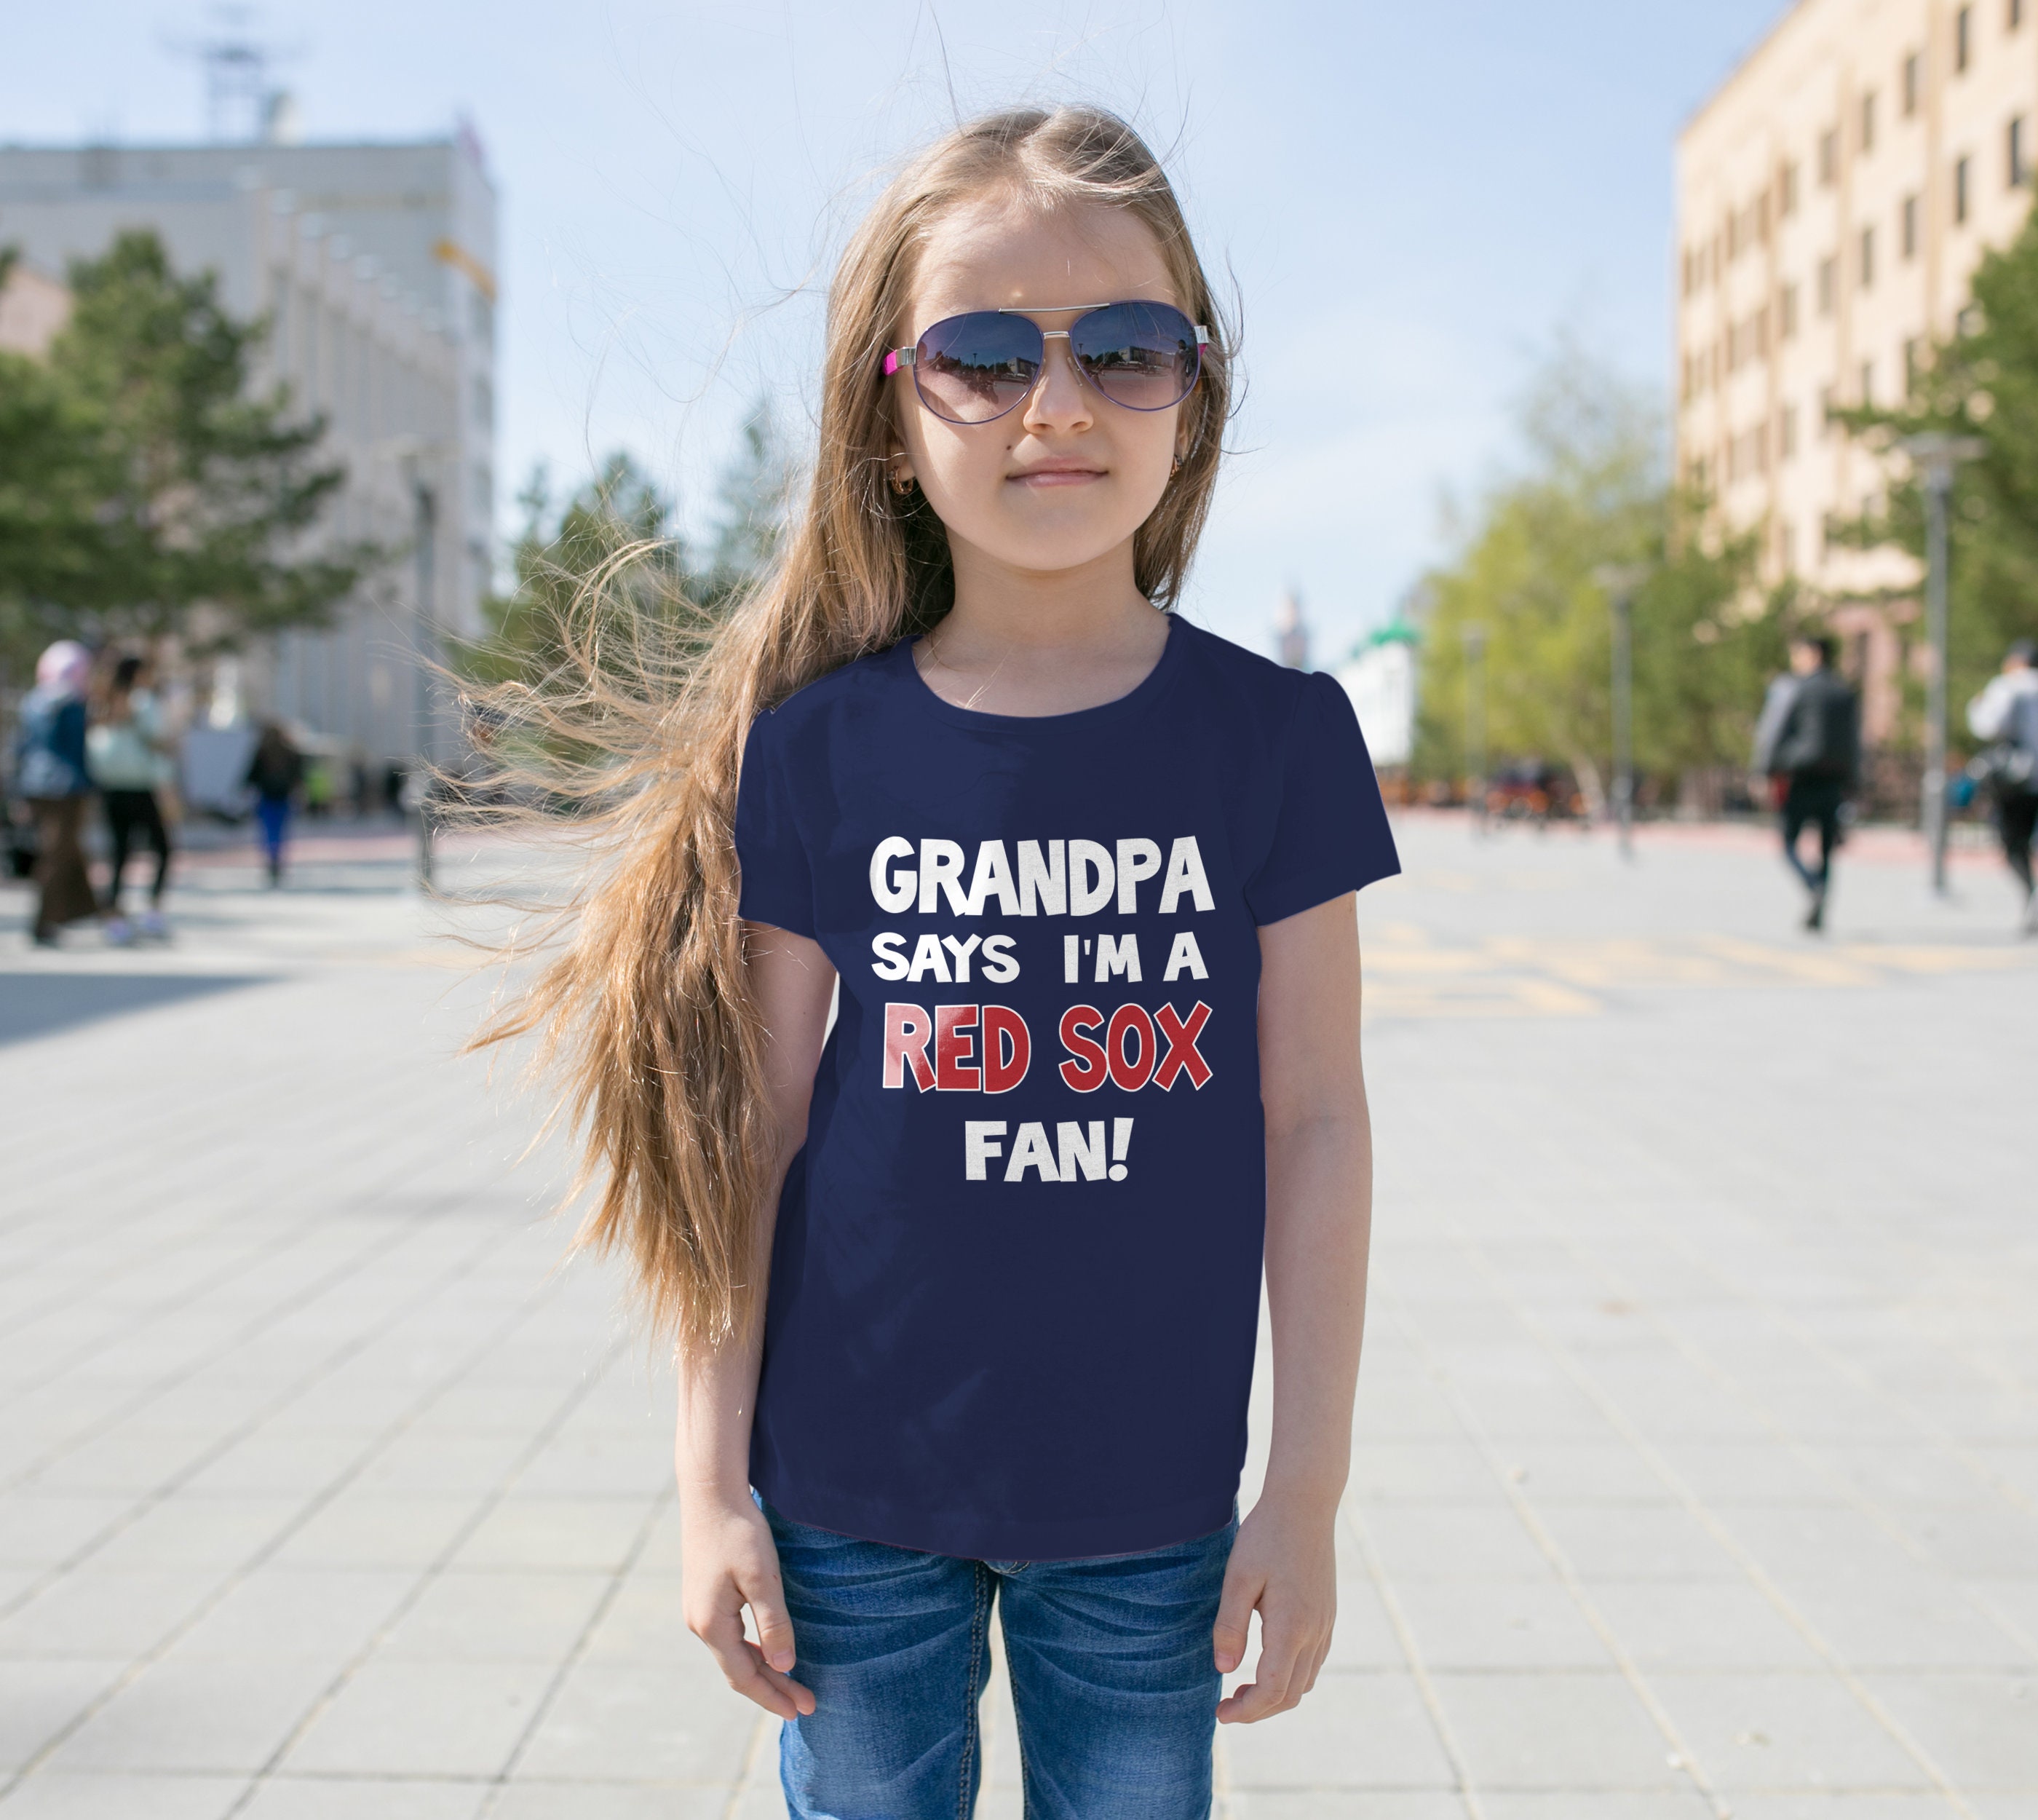 Boston Red Sox Kids Apparel, Kids Red Sox Clothing, Merchandise